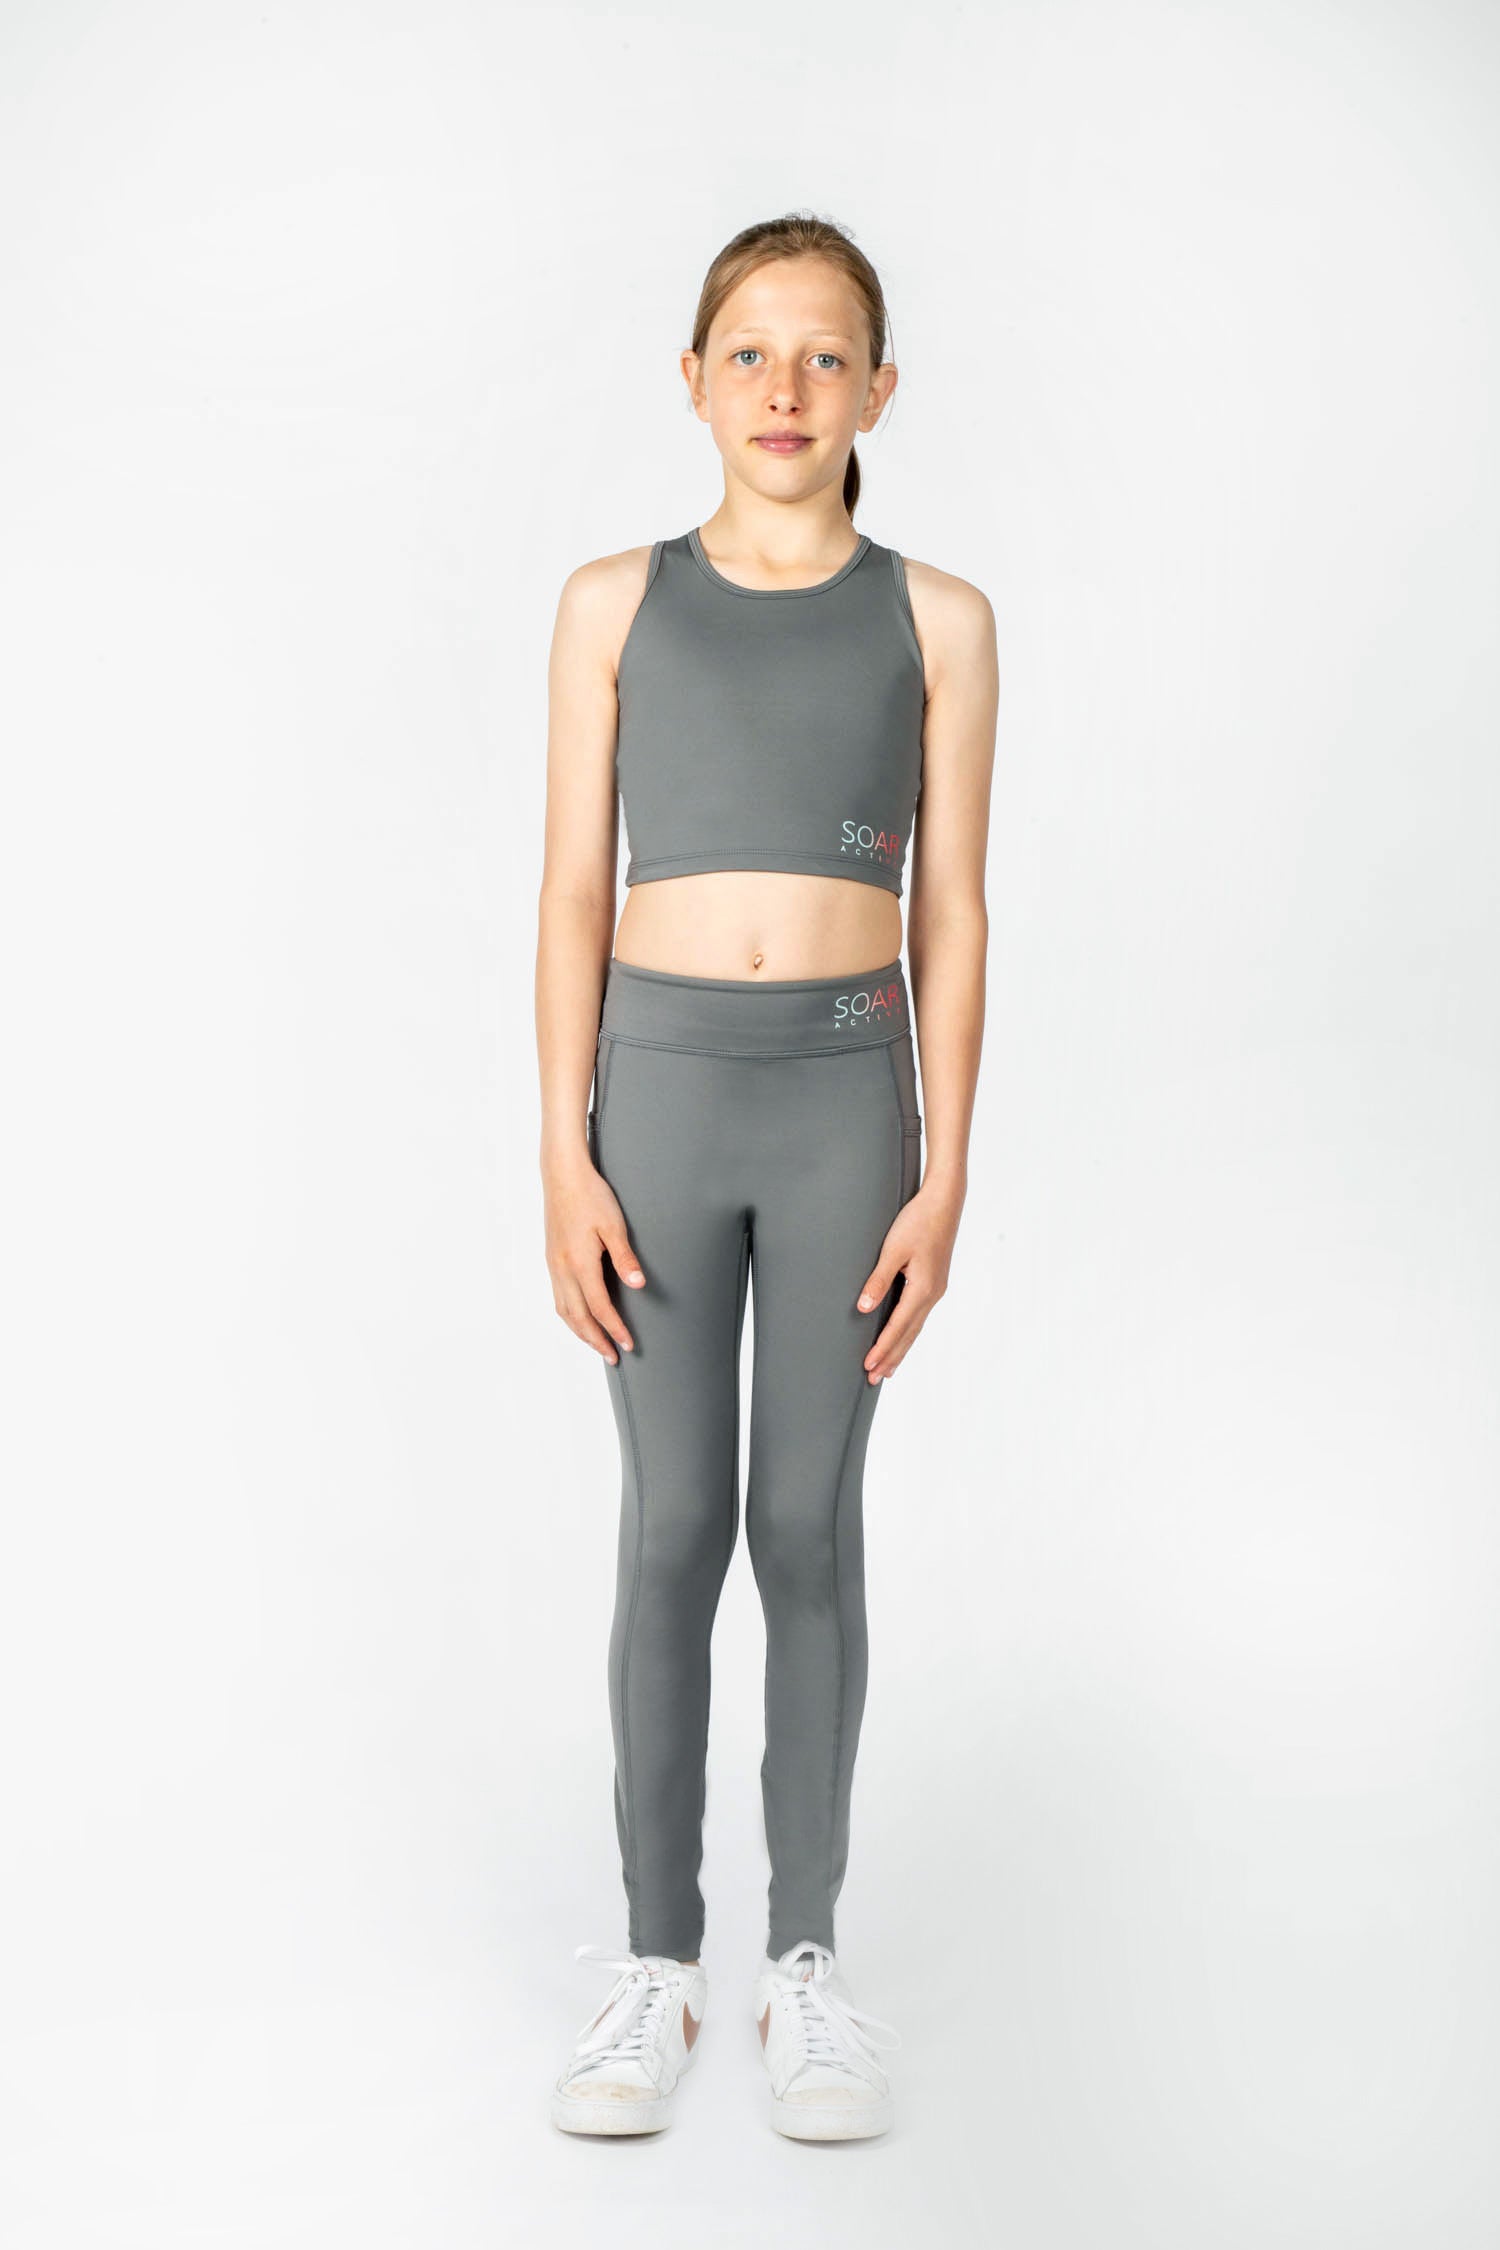 Soar Active Tights XL / Charcoal Rise Full Length Tight